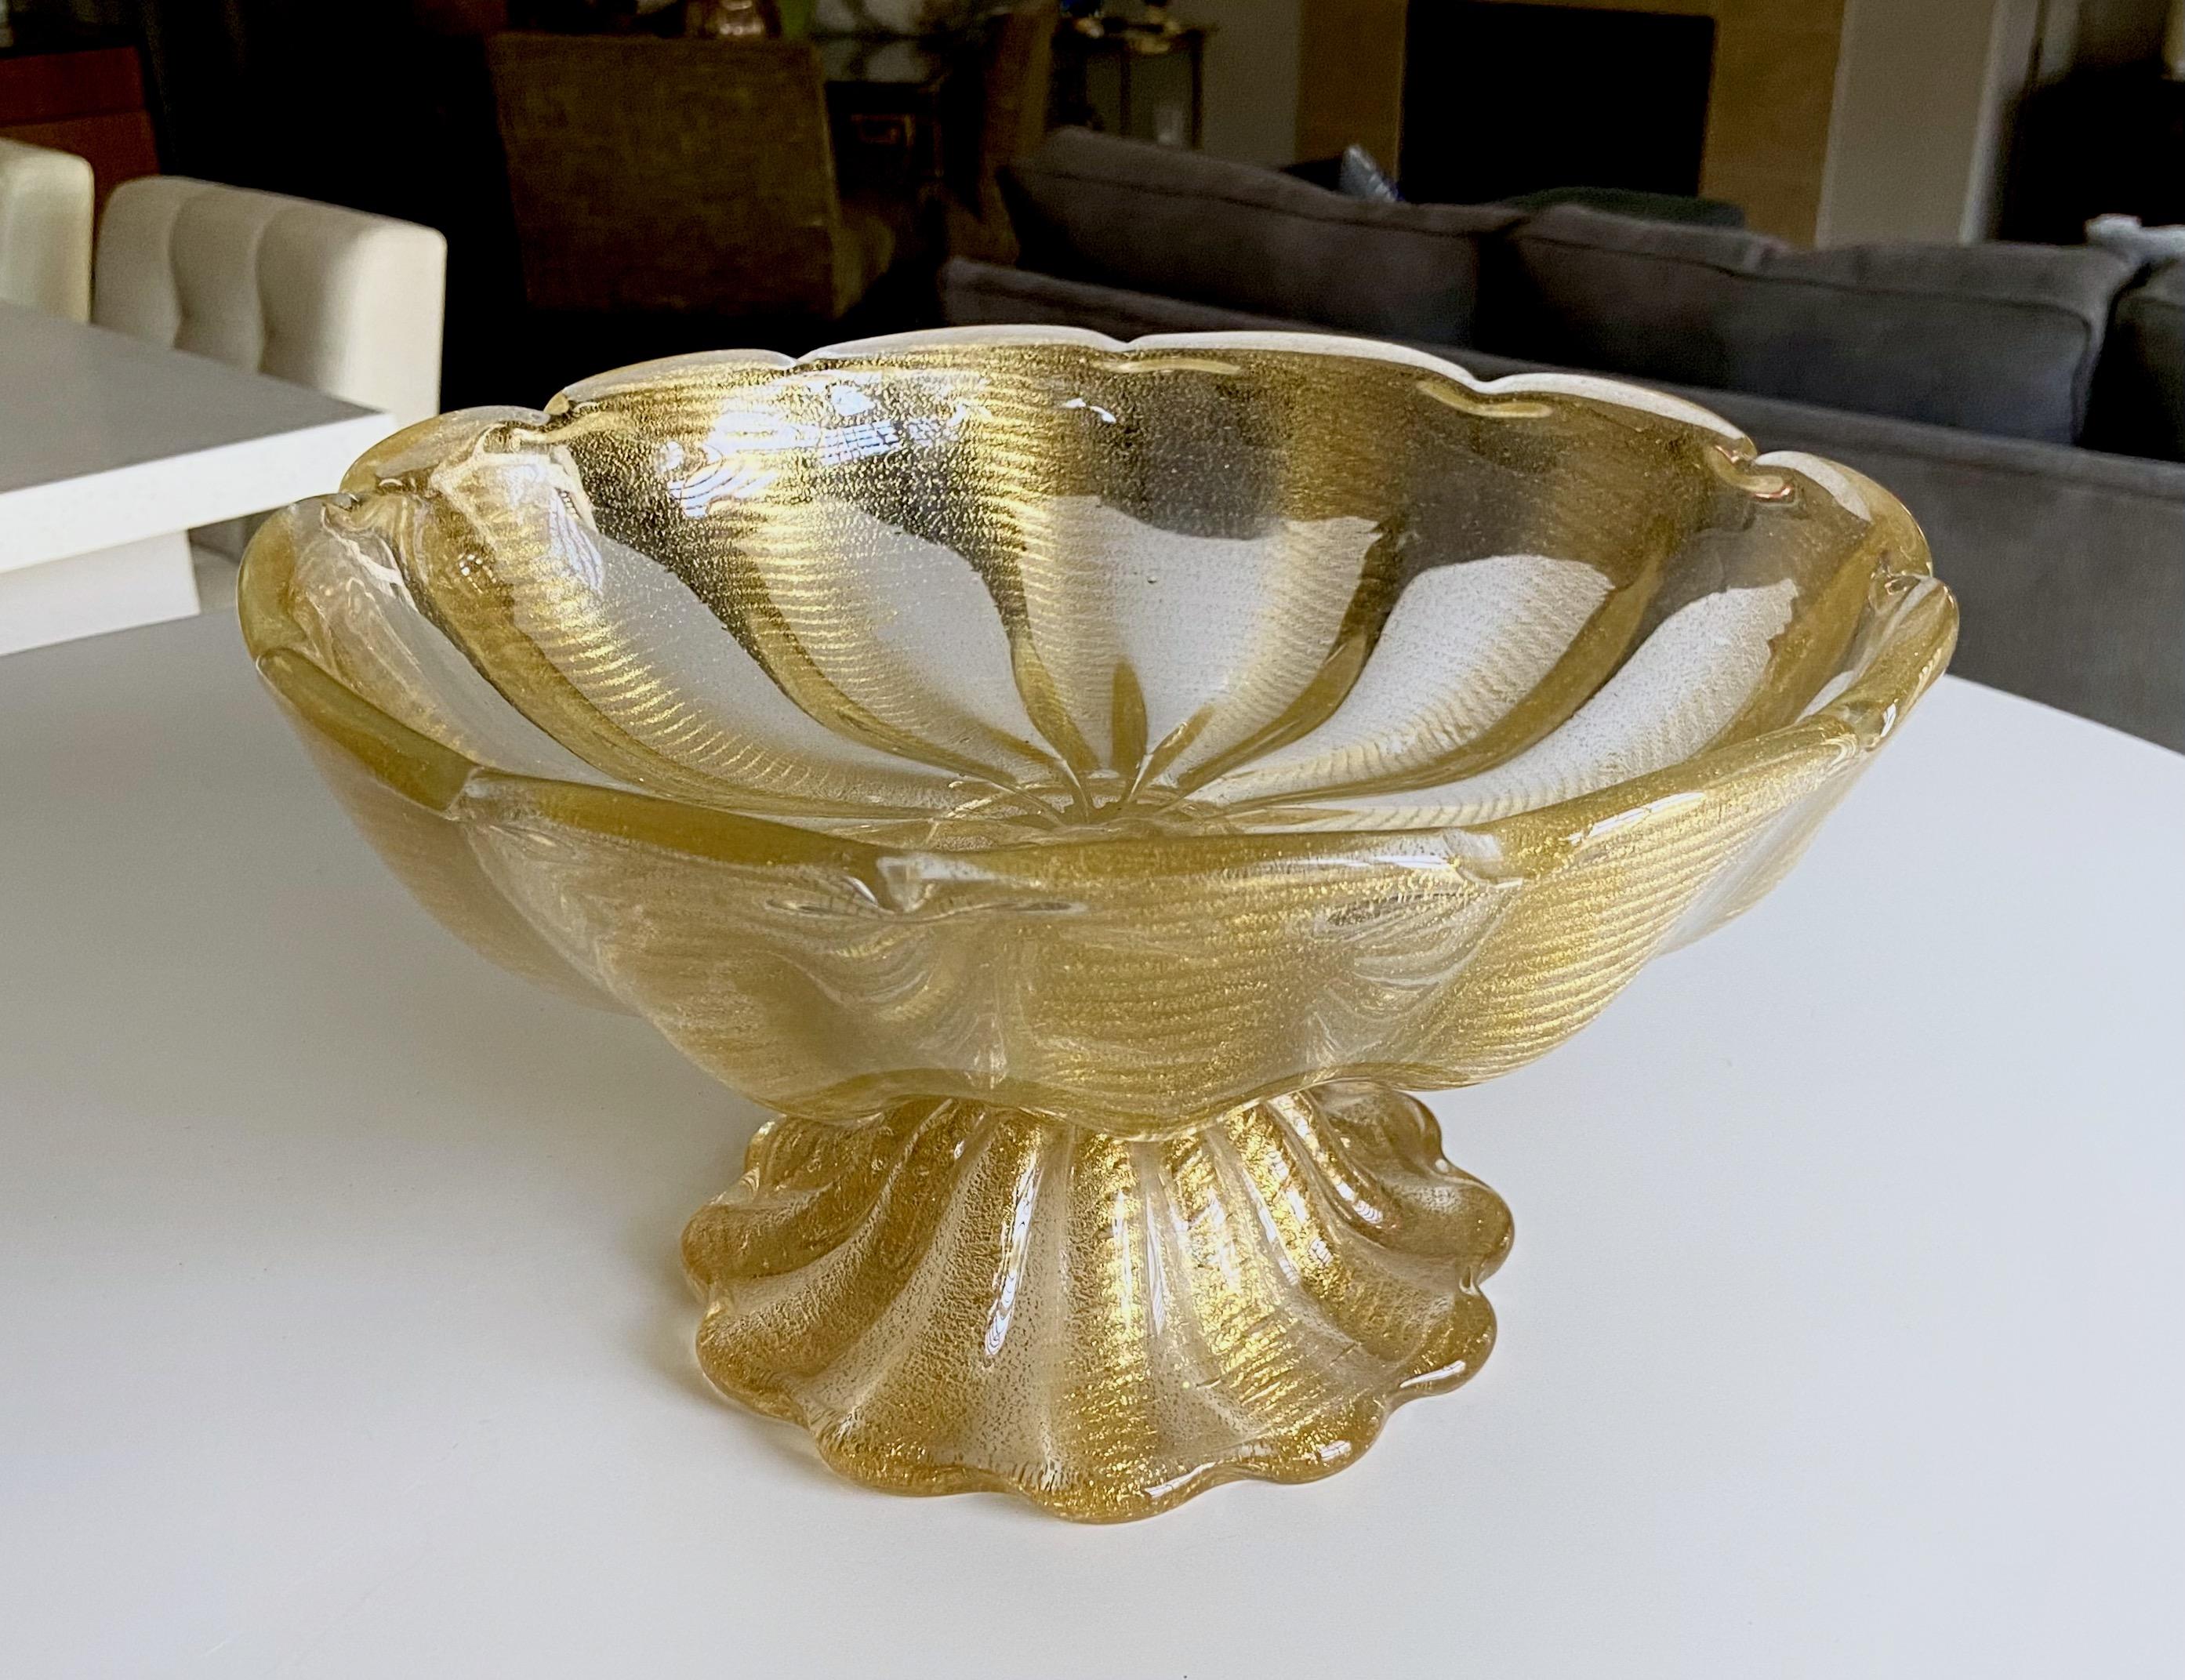 Large Barovier & Toso Murano handblown centerpiece bowl in the Coronado d'ore technique. Expertly crafted of thick clear glass with gold inclusions.